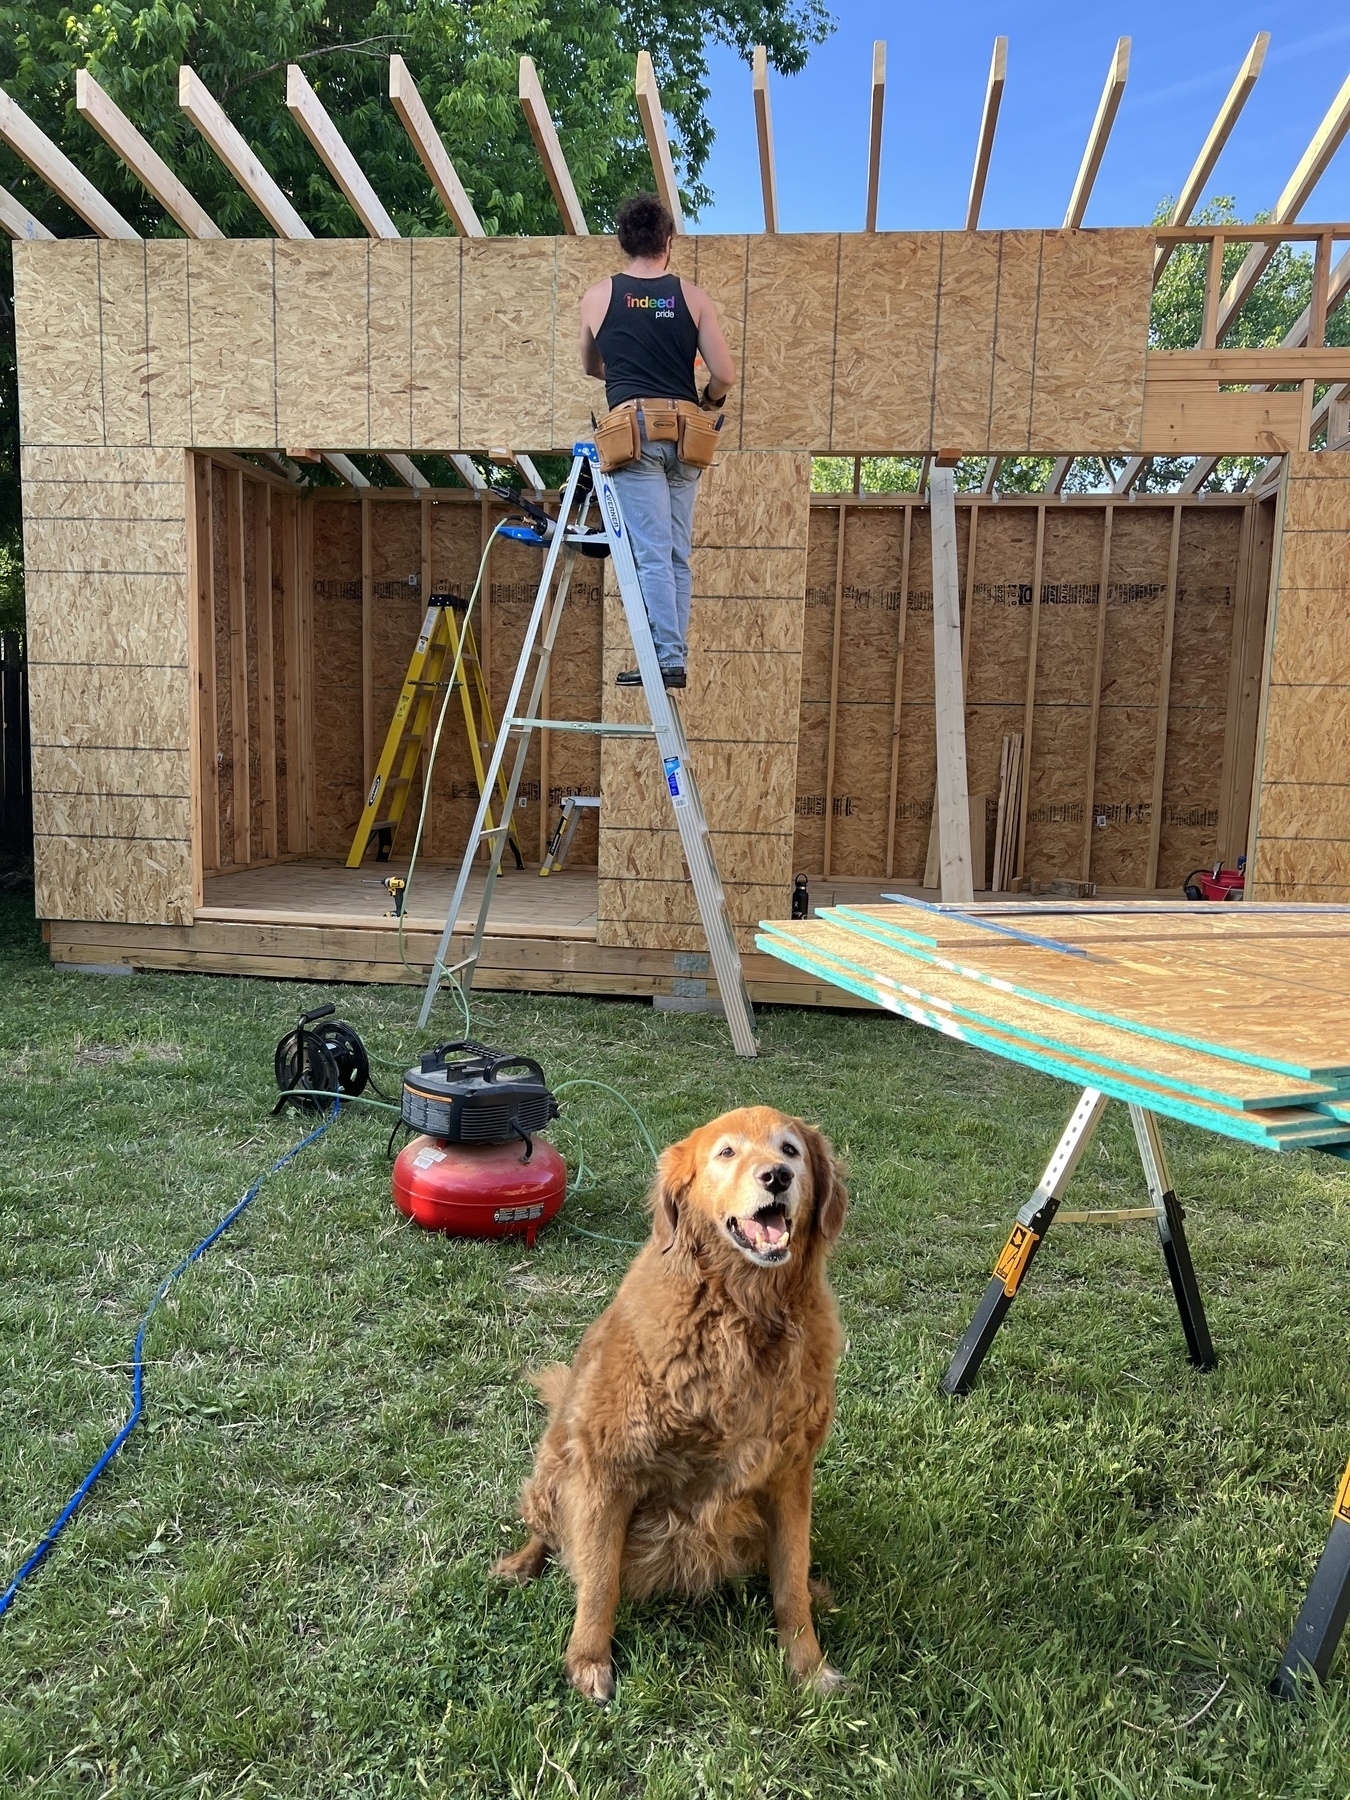 Bones supervises the job site while Casey stands on a ladder working in the background